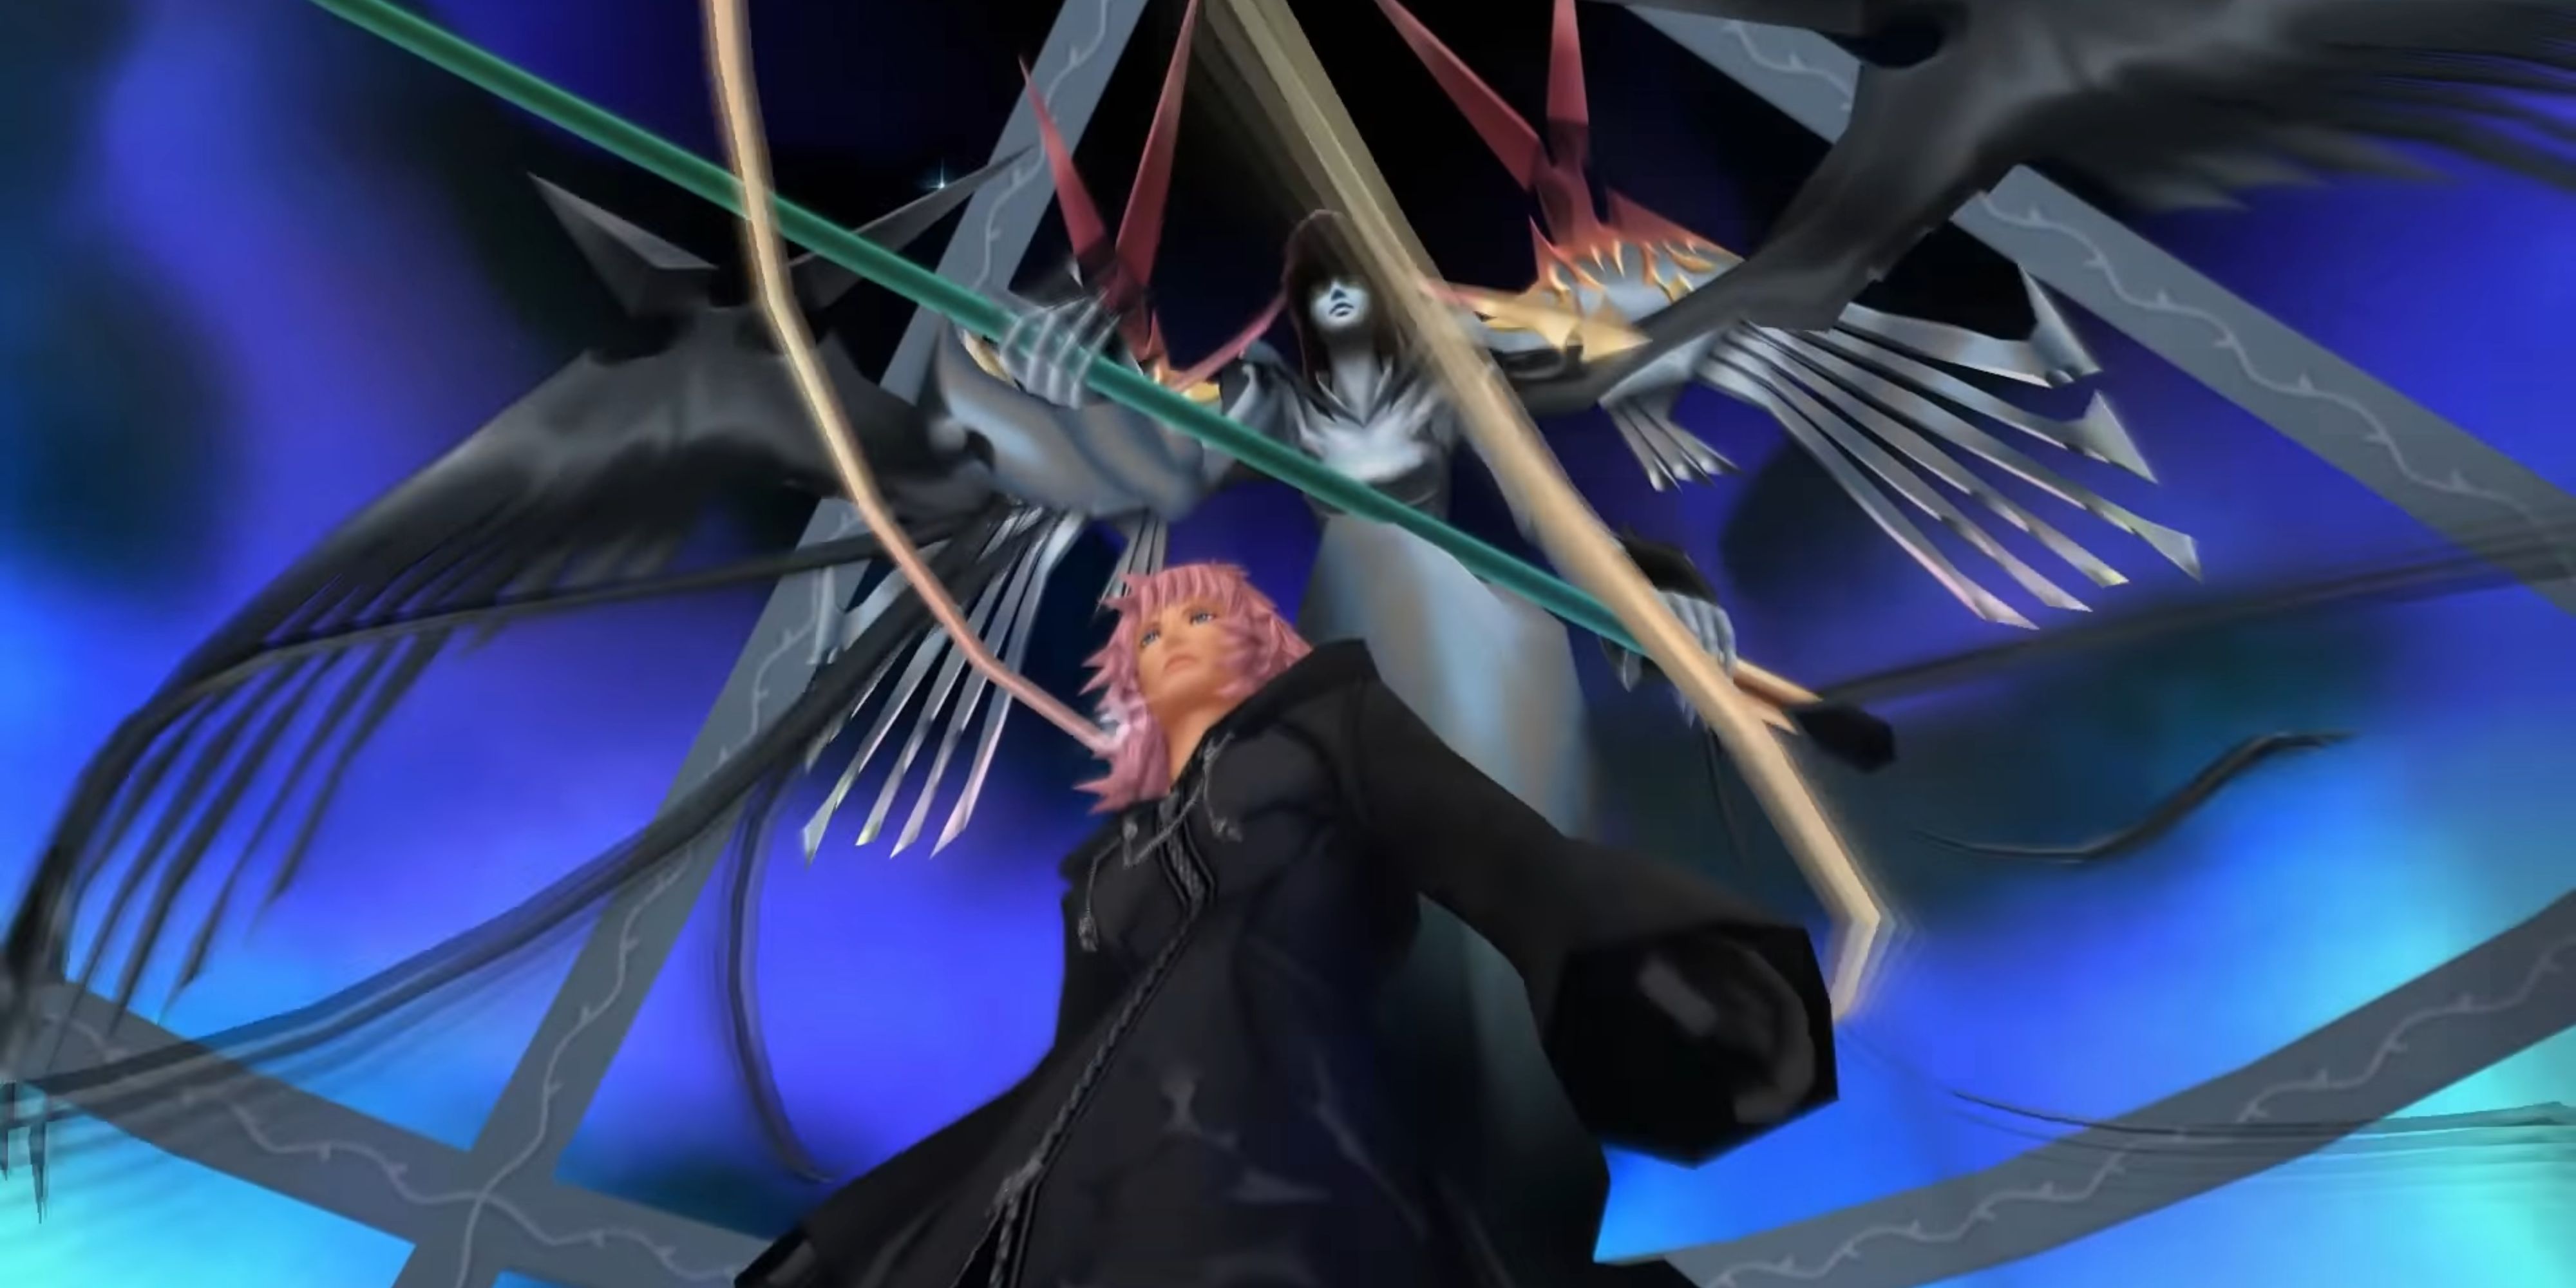 Marluxia and his Nobody companion, at the end of Chain of Memories.